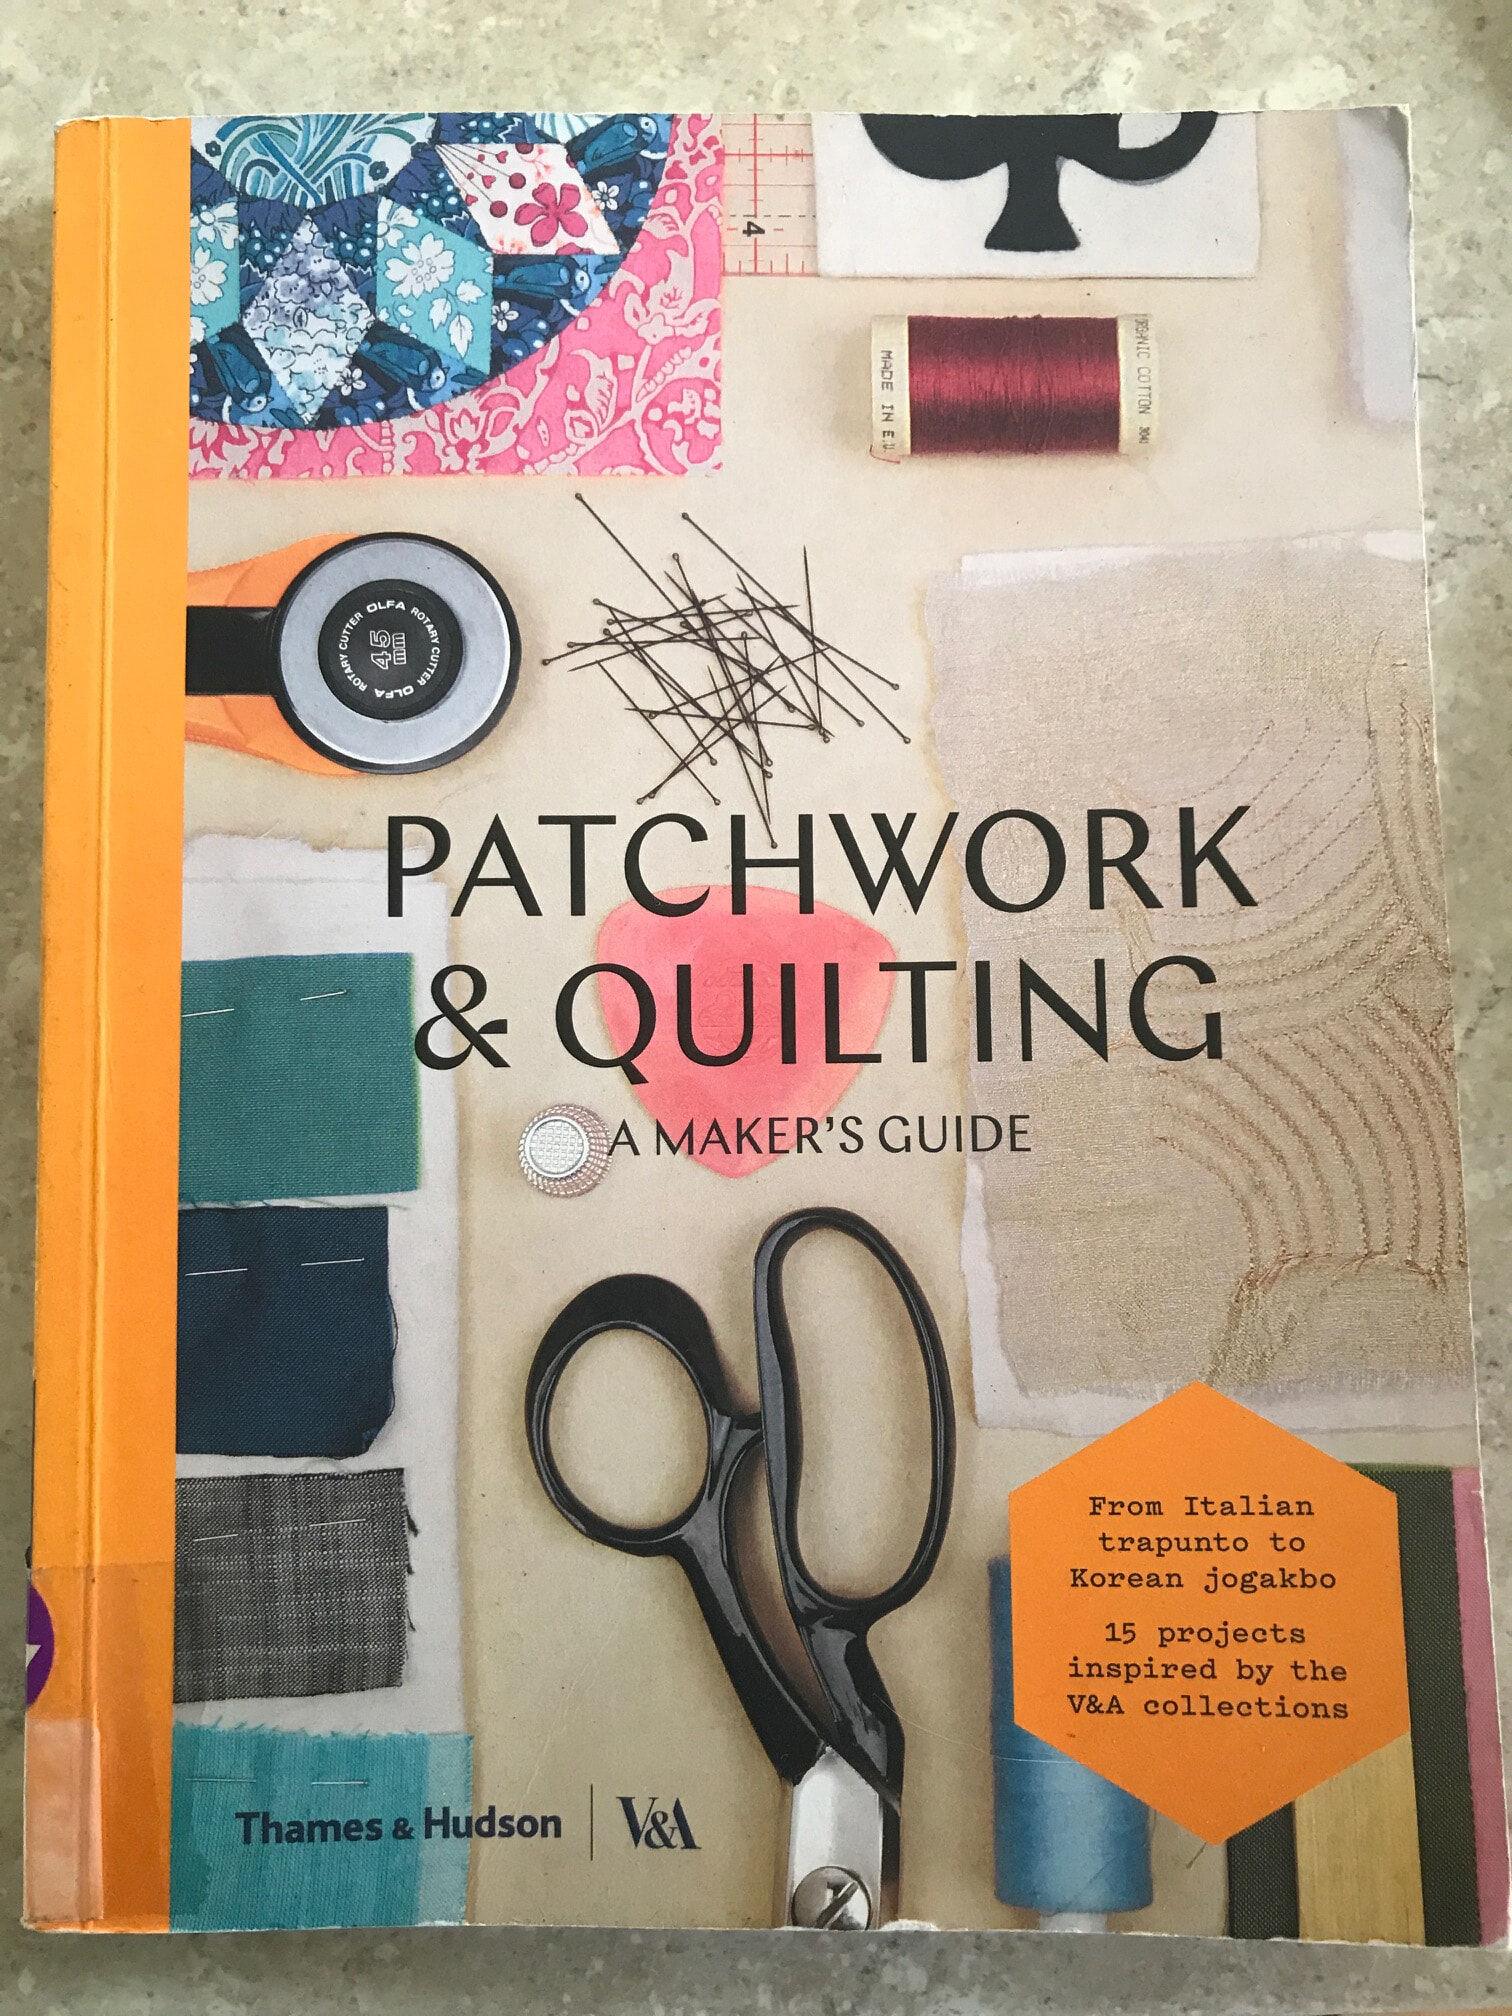 Patchwork and Quilting book